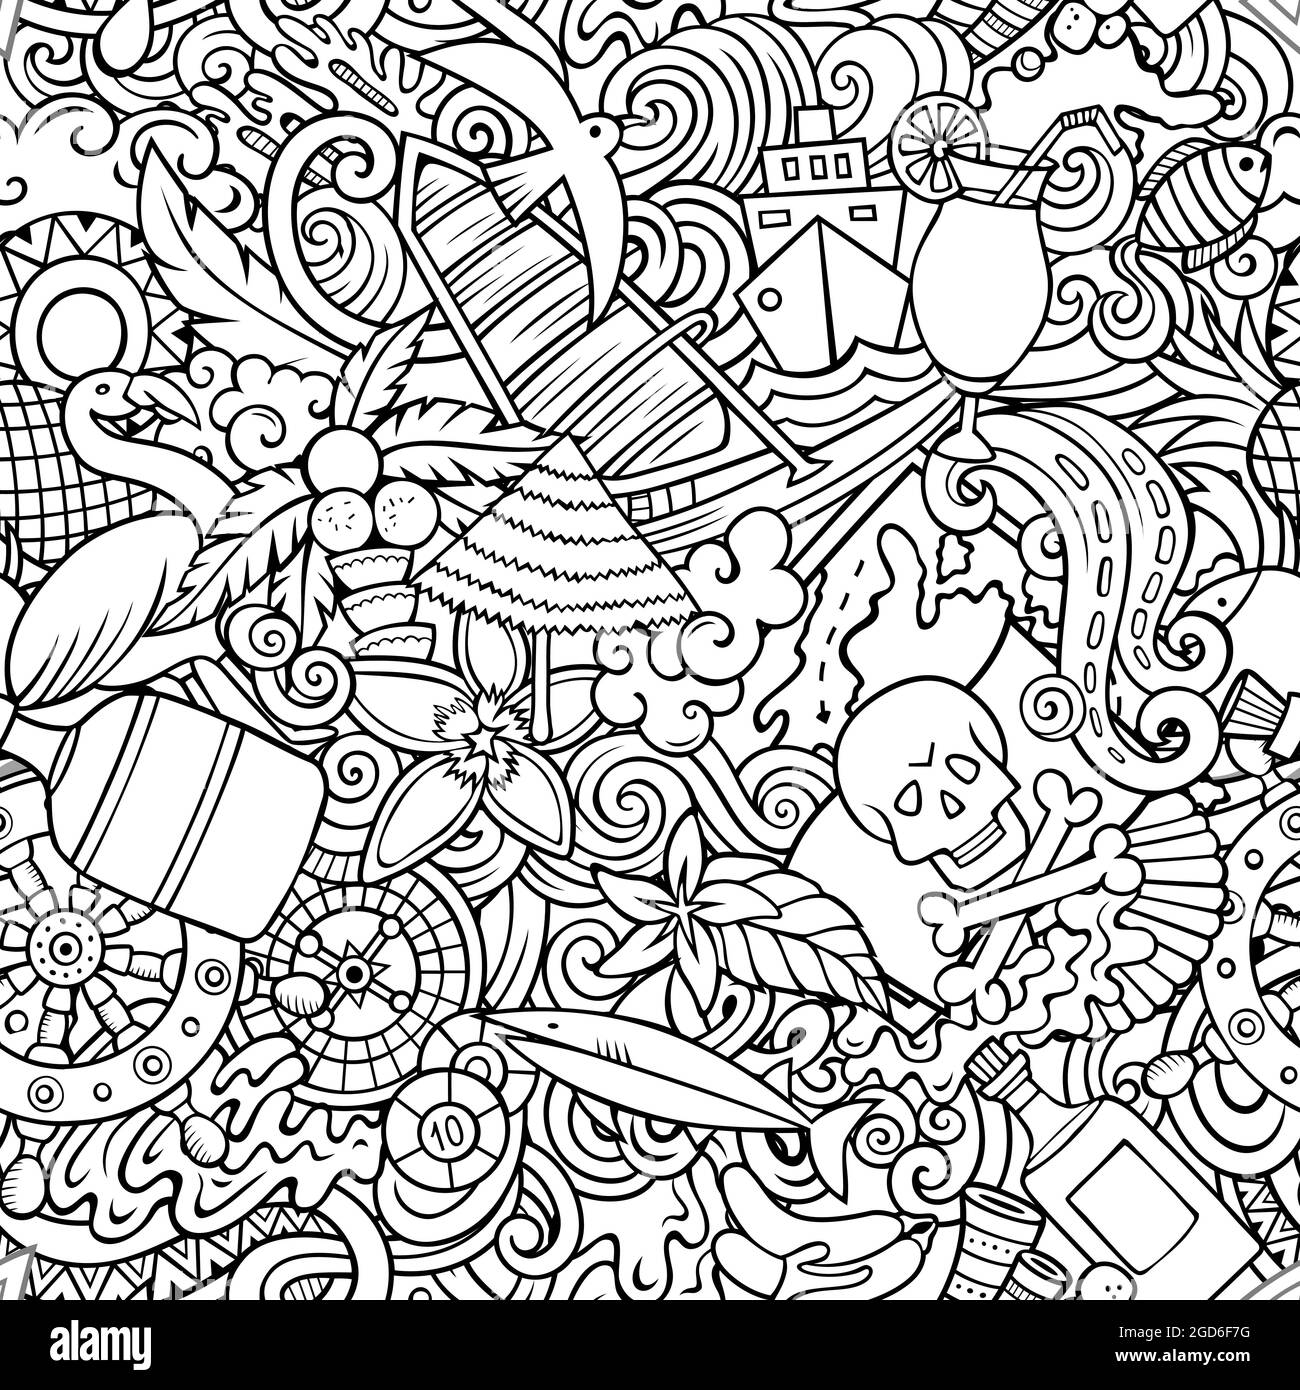 Cartoon doodles Bahamas seamless pattern. Backdrop with Bahamian culture symbols and items. Line art detailed, with lots of objects background for pri Stock Vector